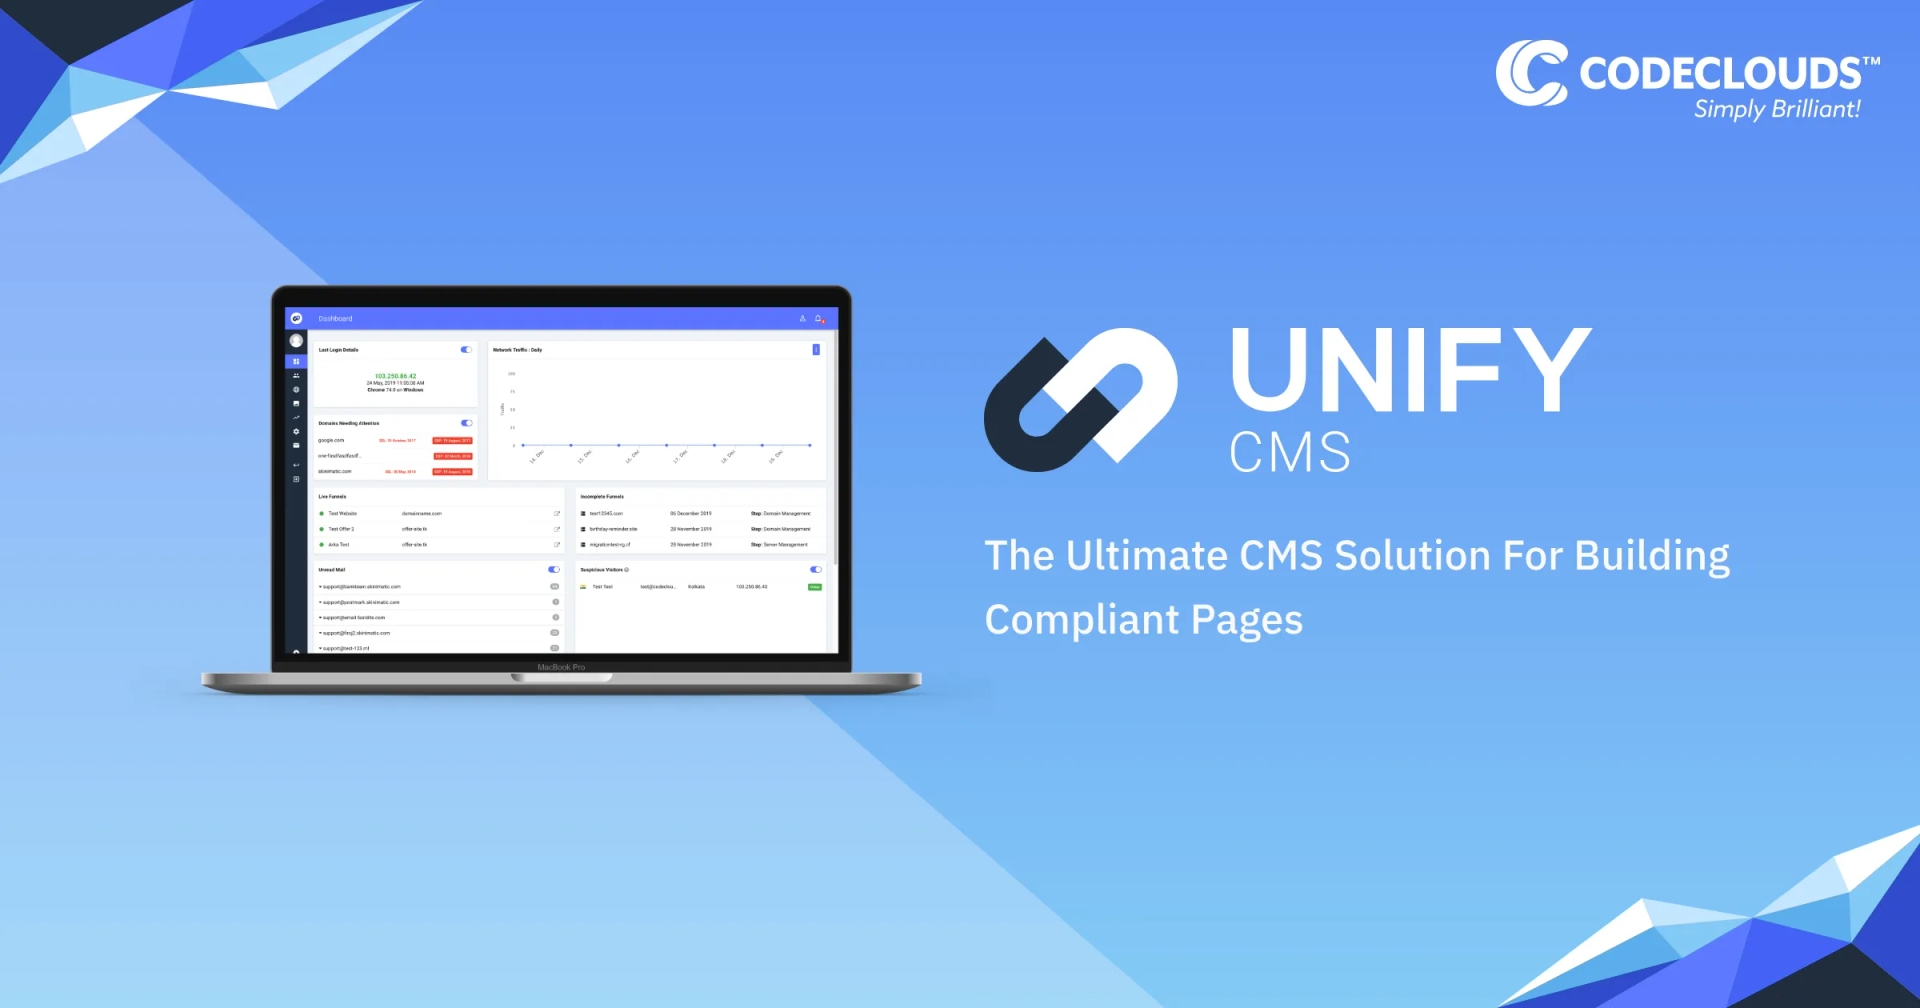 Unify CMS - The Hosted CMS for Direct Response Marketers